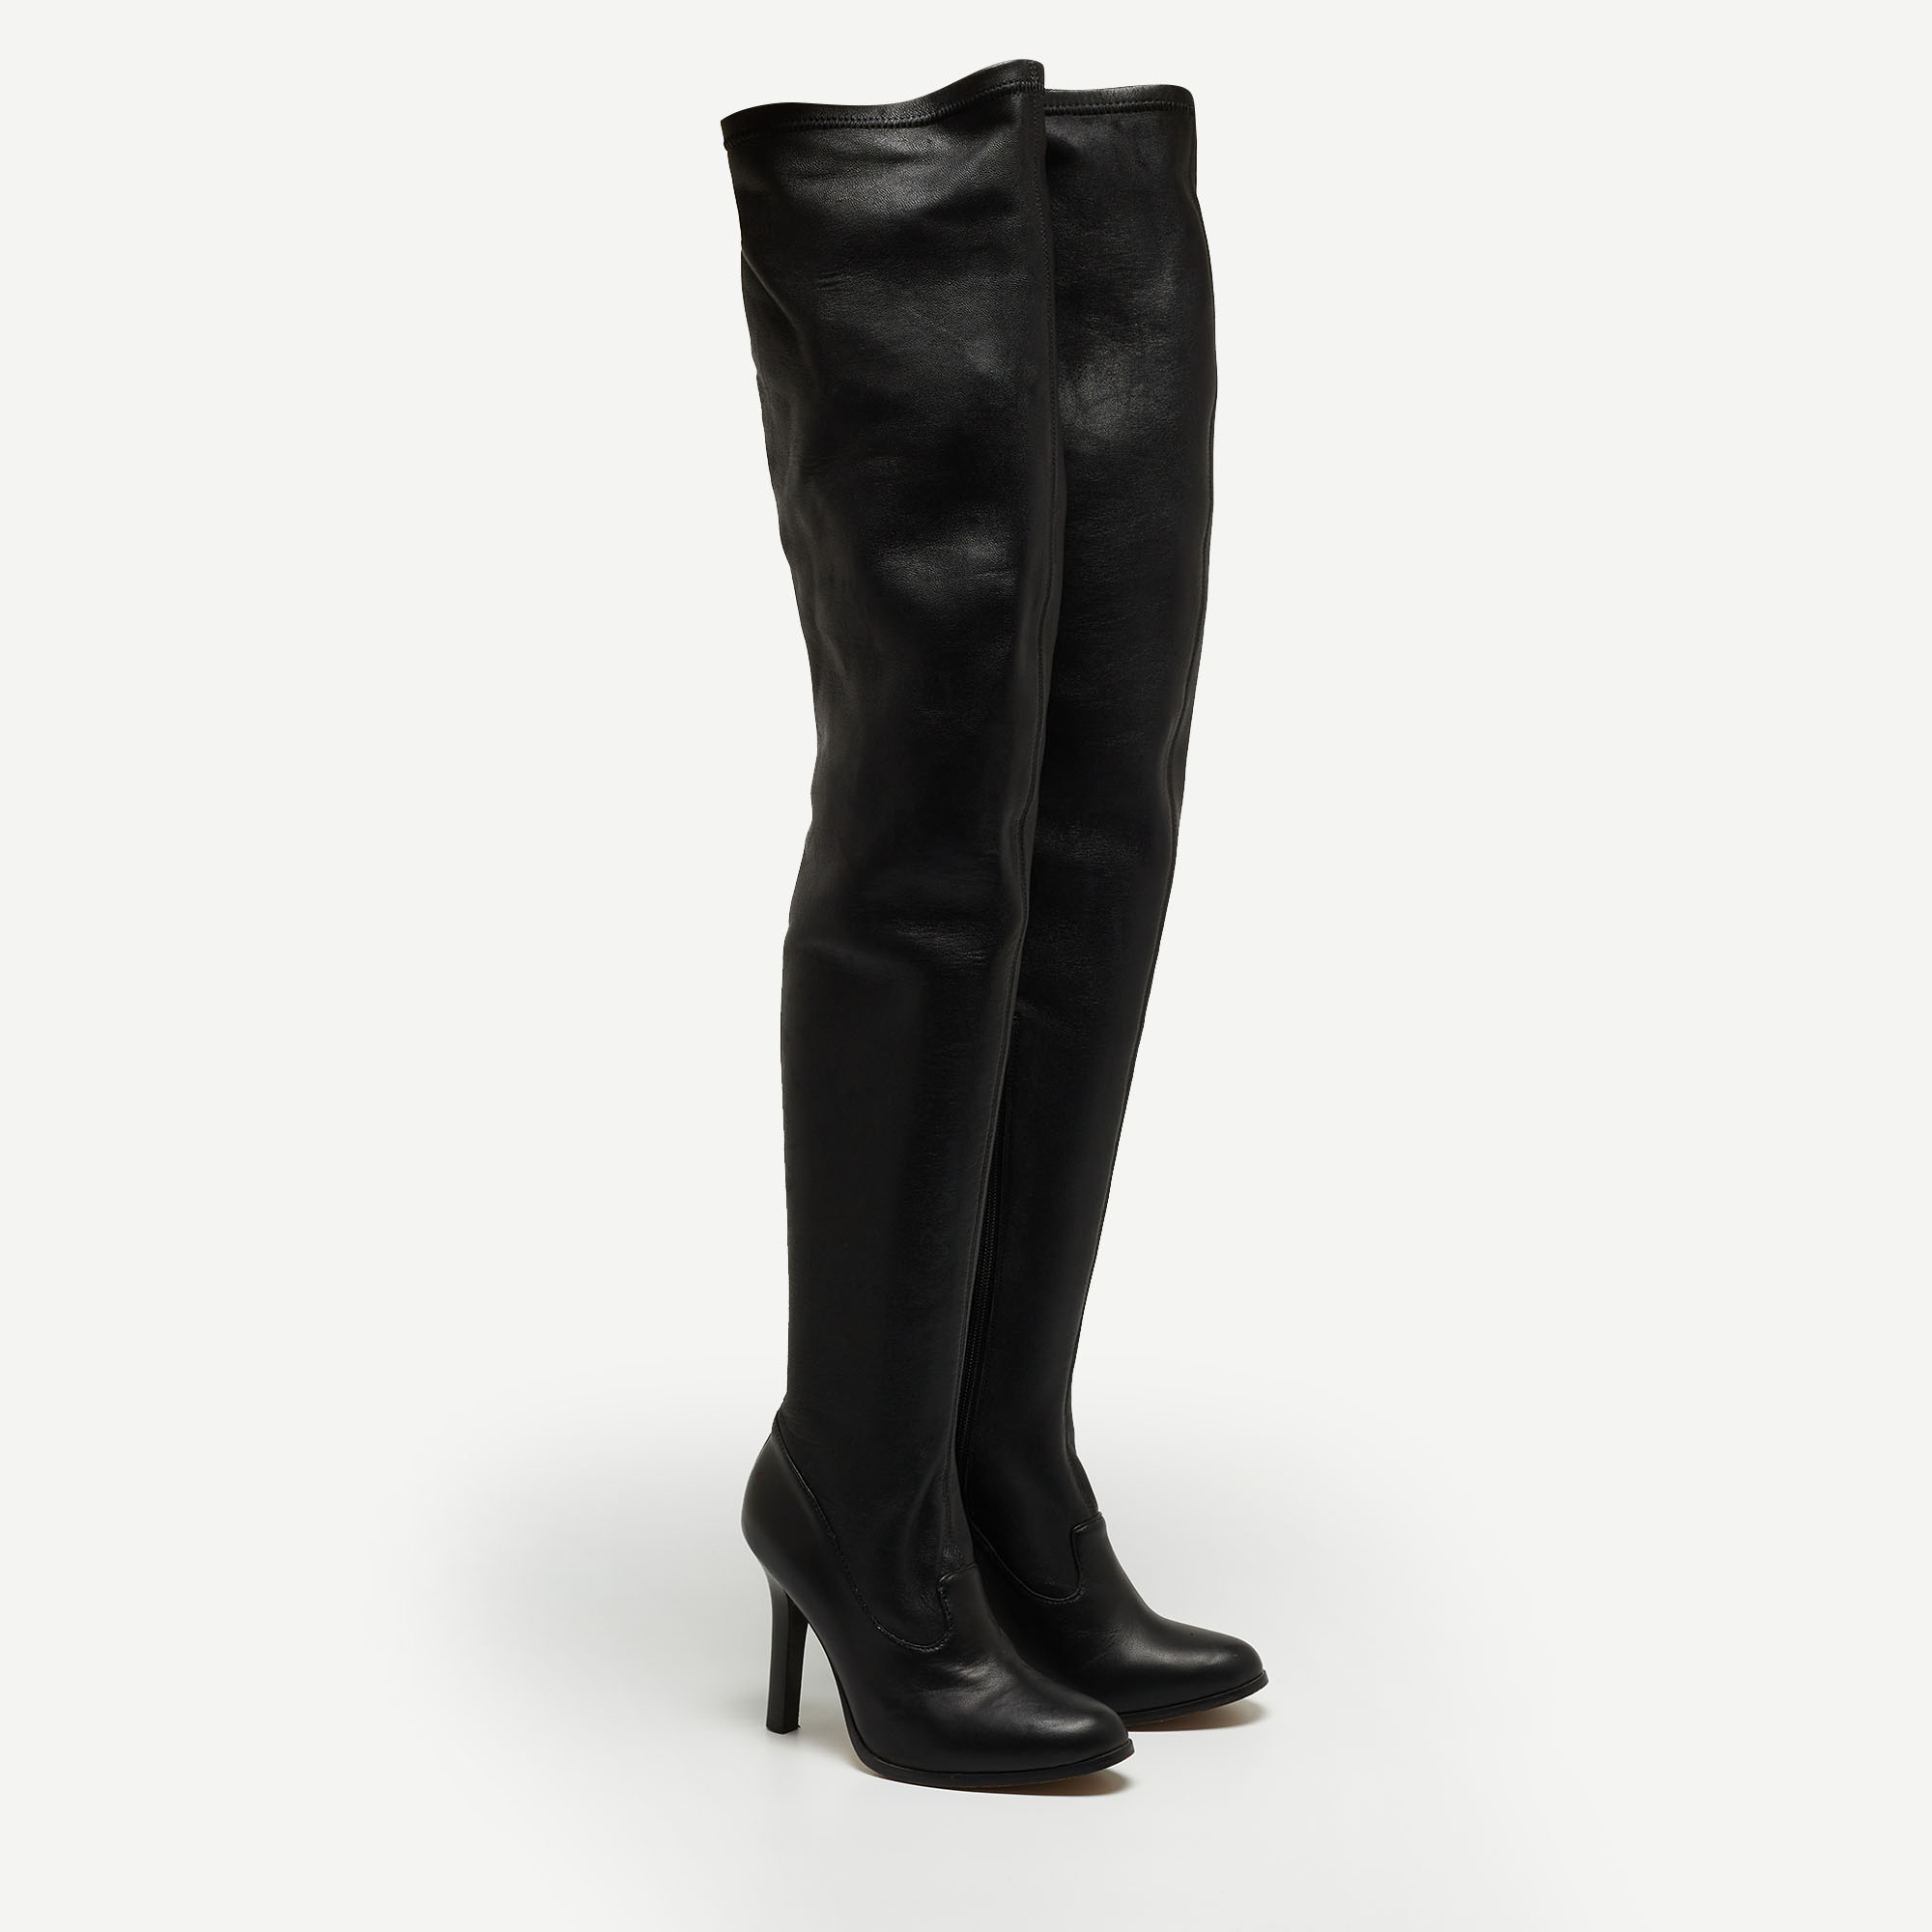 Jimmy Choo For H&M Black Leather Thigh High Boots Size 37